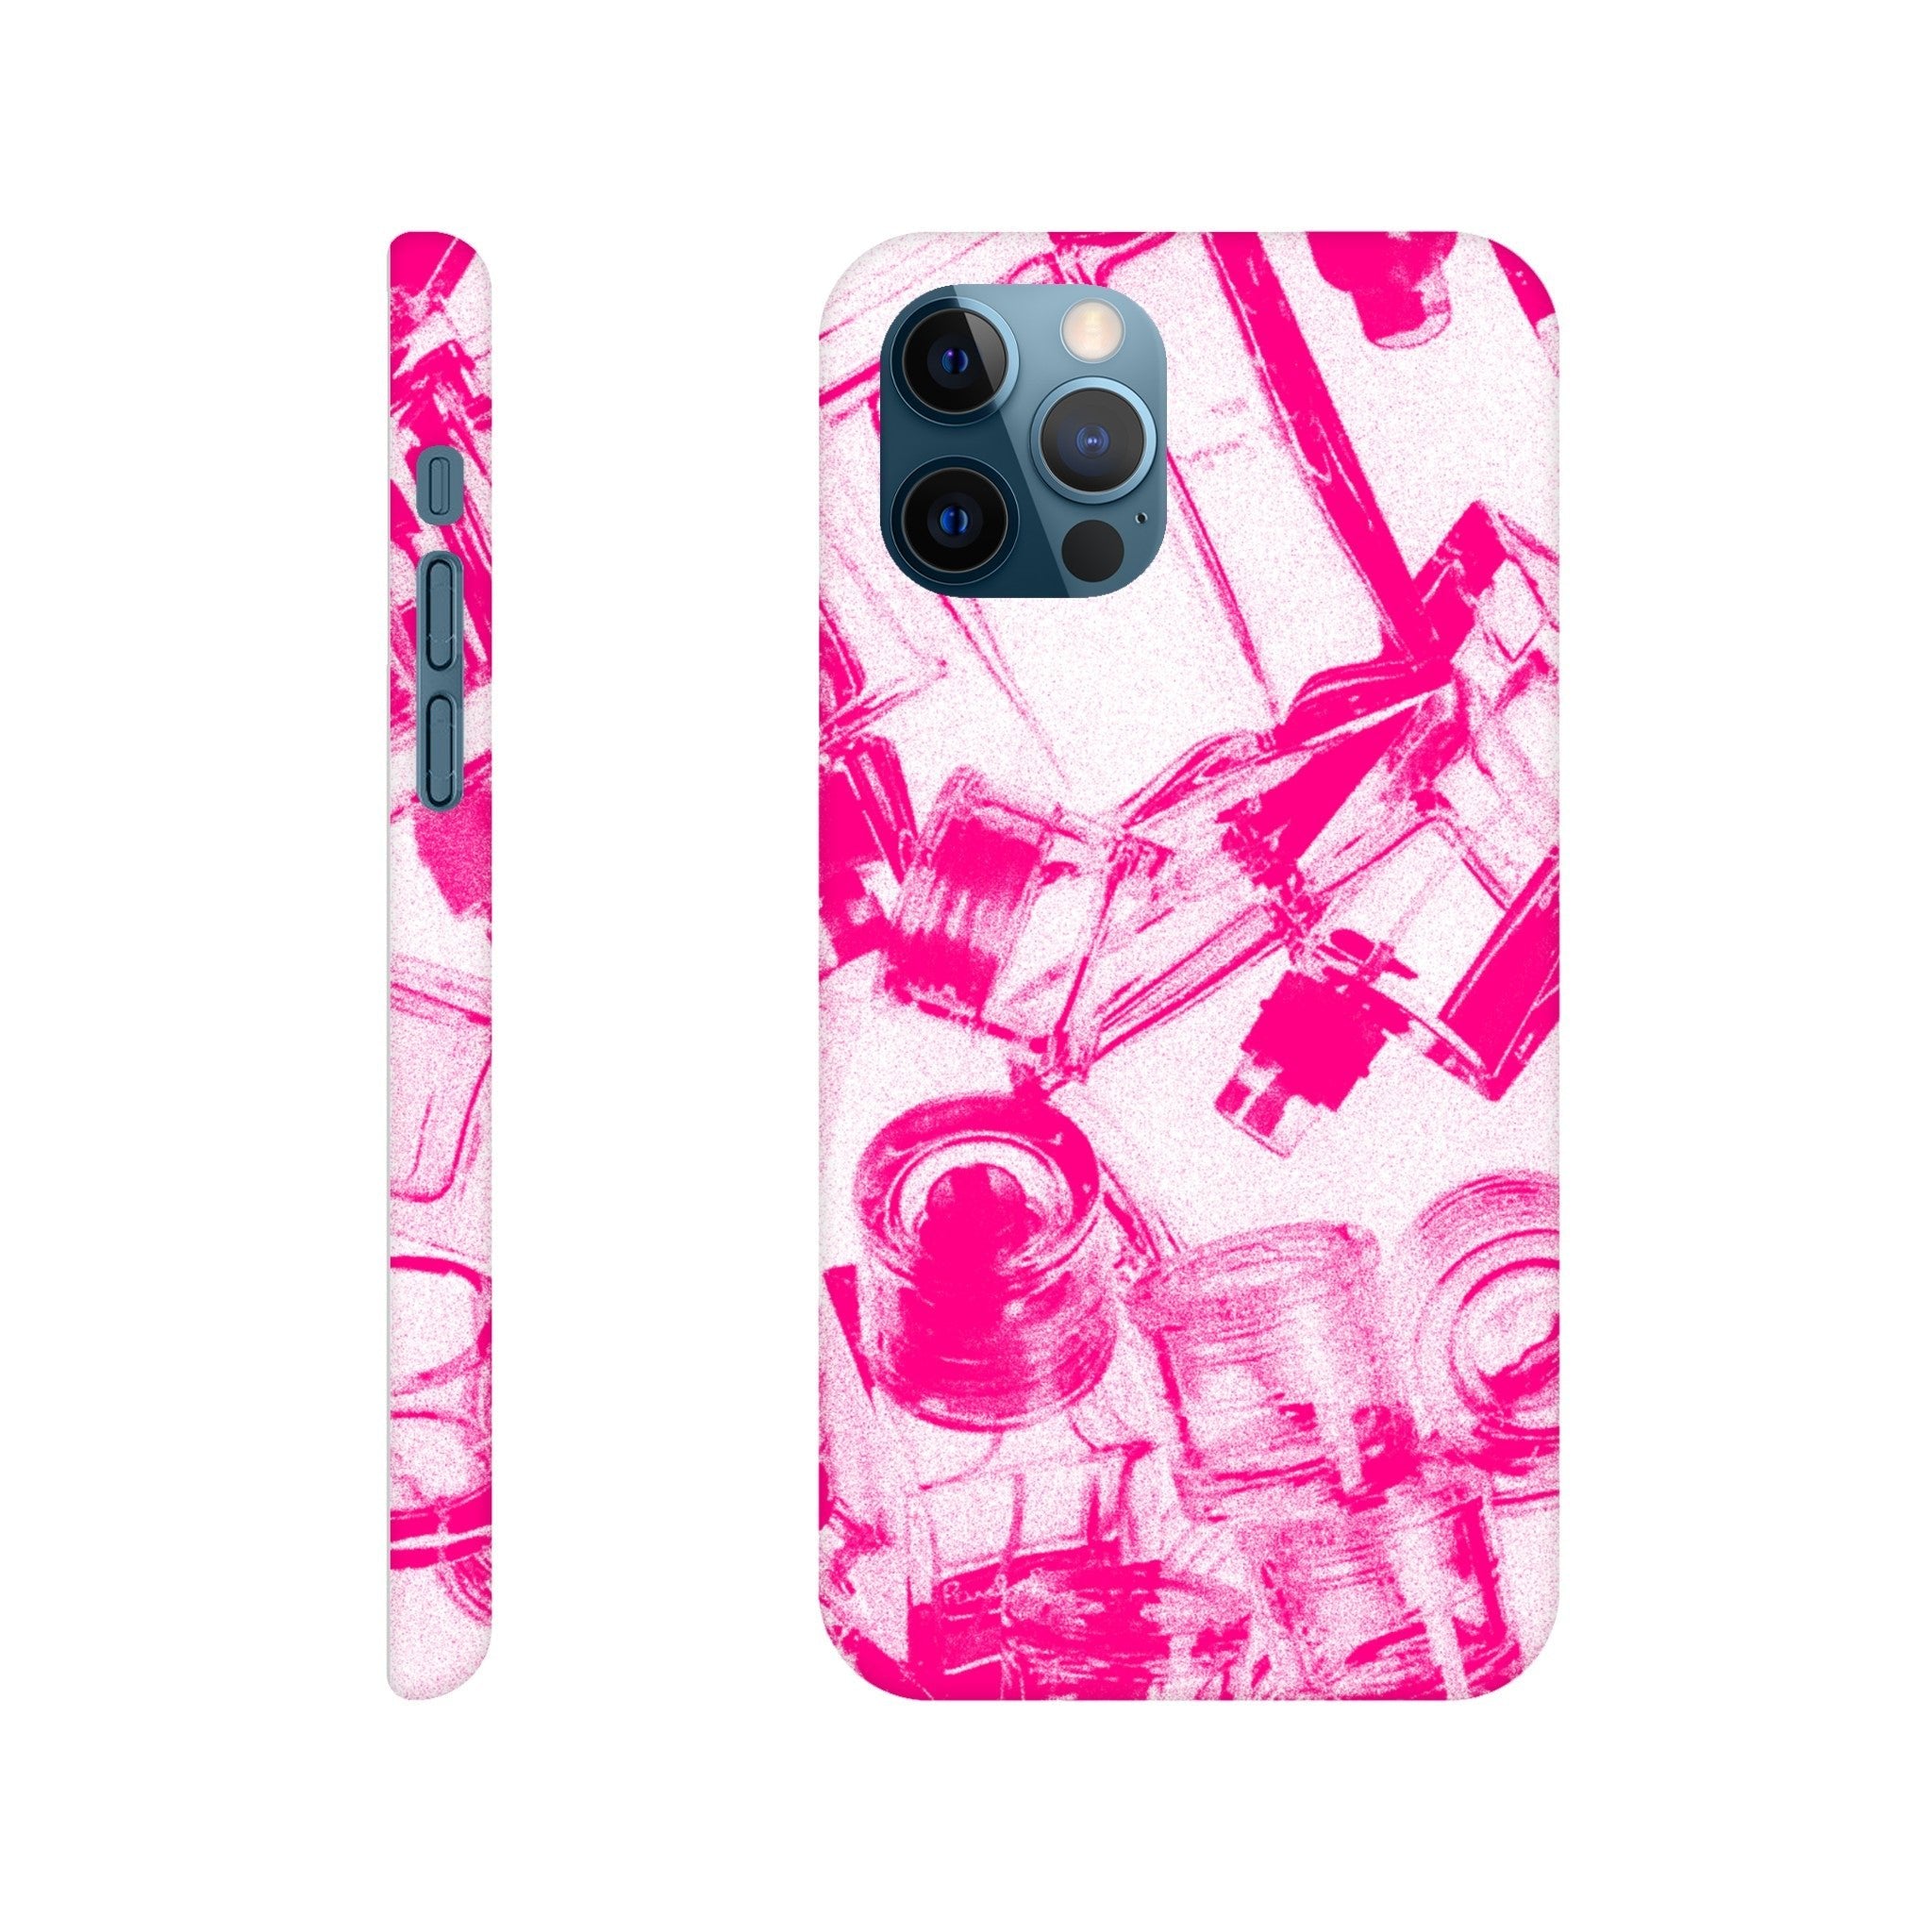 'Bottled Up' phone case - In Print We Trust